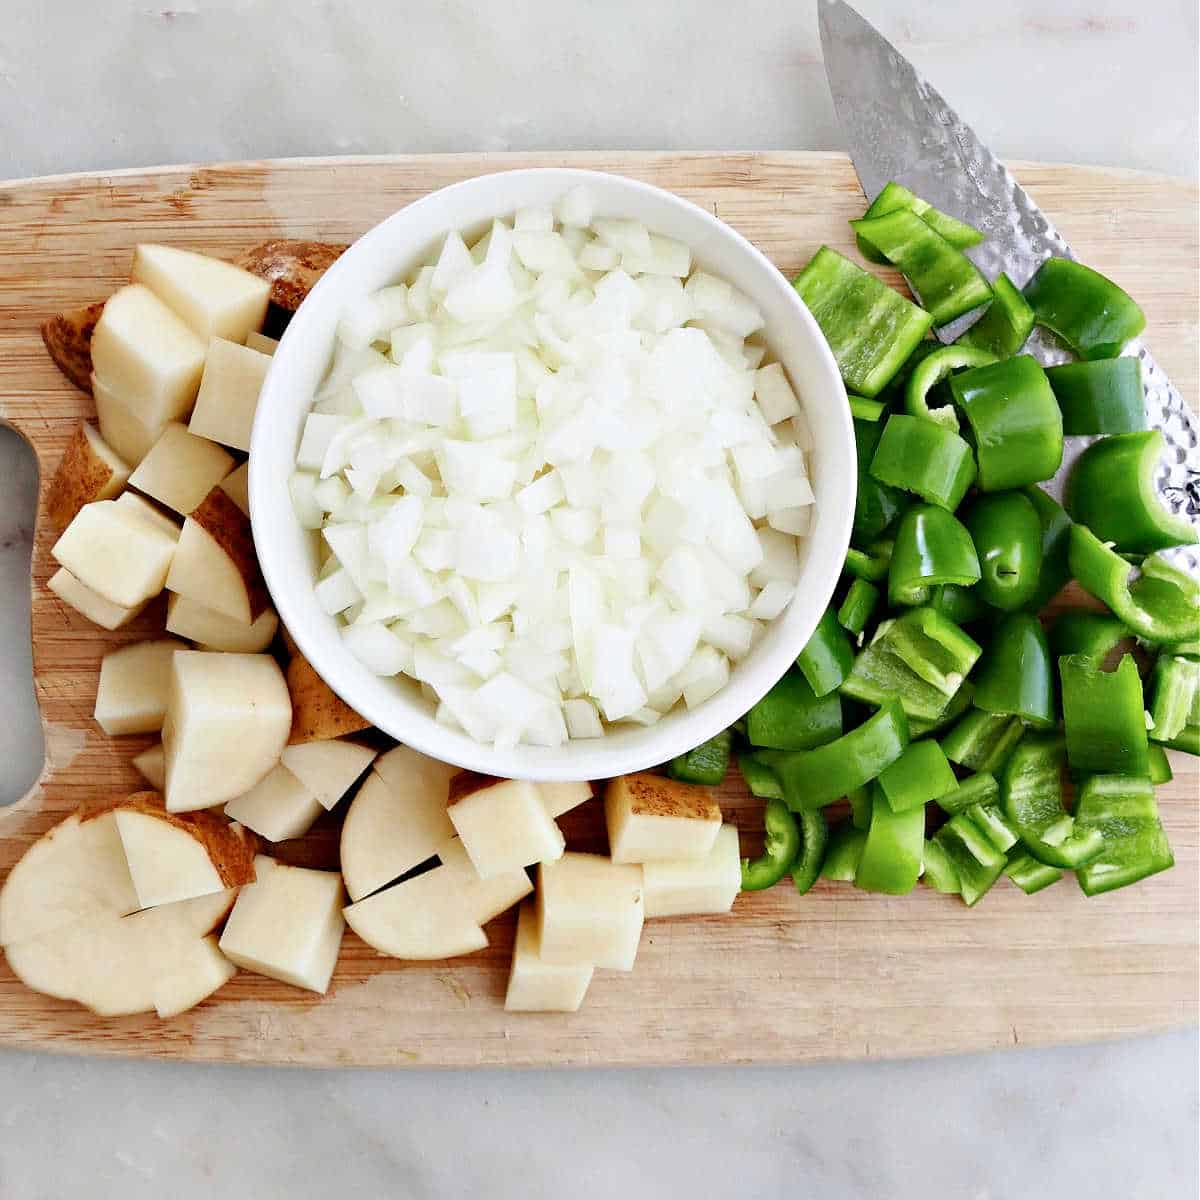 sliced potatoes, onion, and jalapeños on a cutting board next to a knife